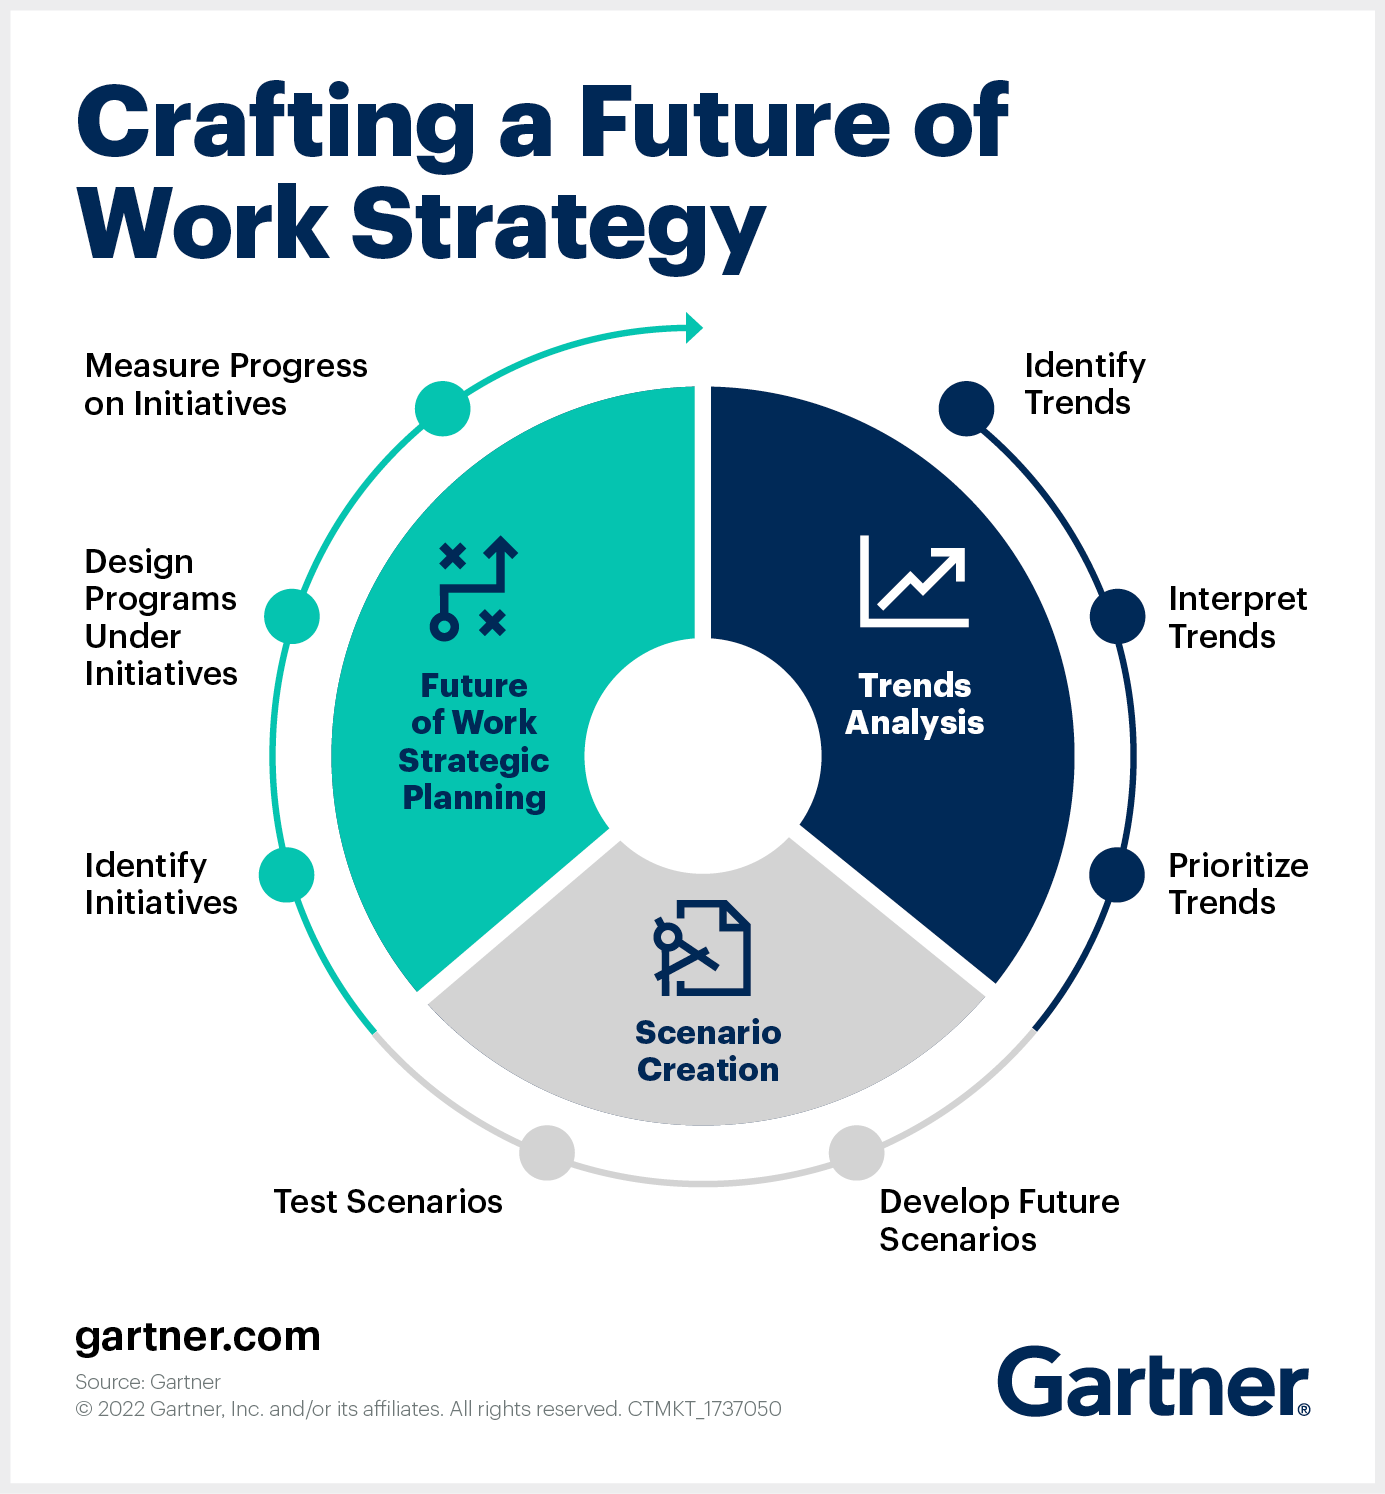 Crafting a Future of Work Strategy